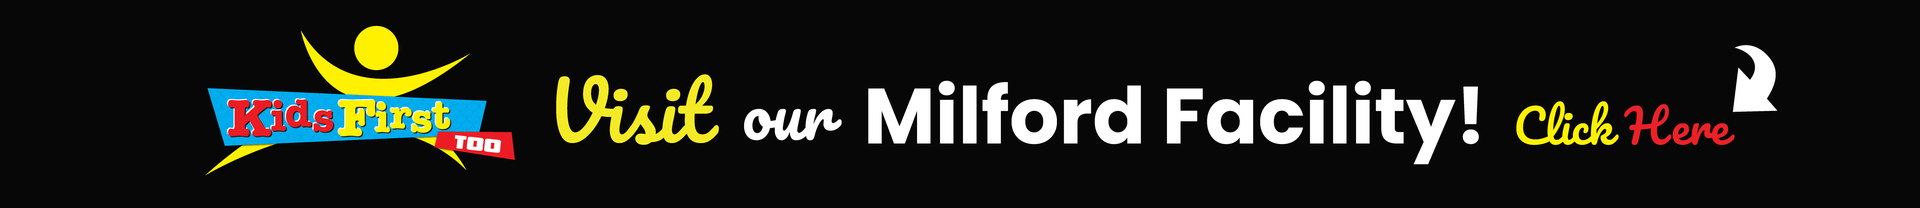 Visit our Milford Facility! Click here